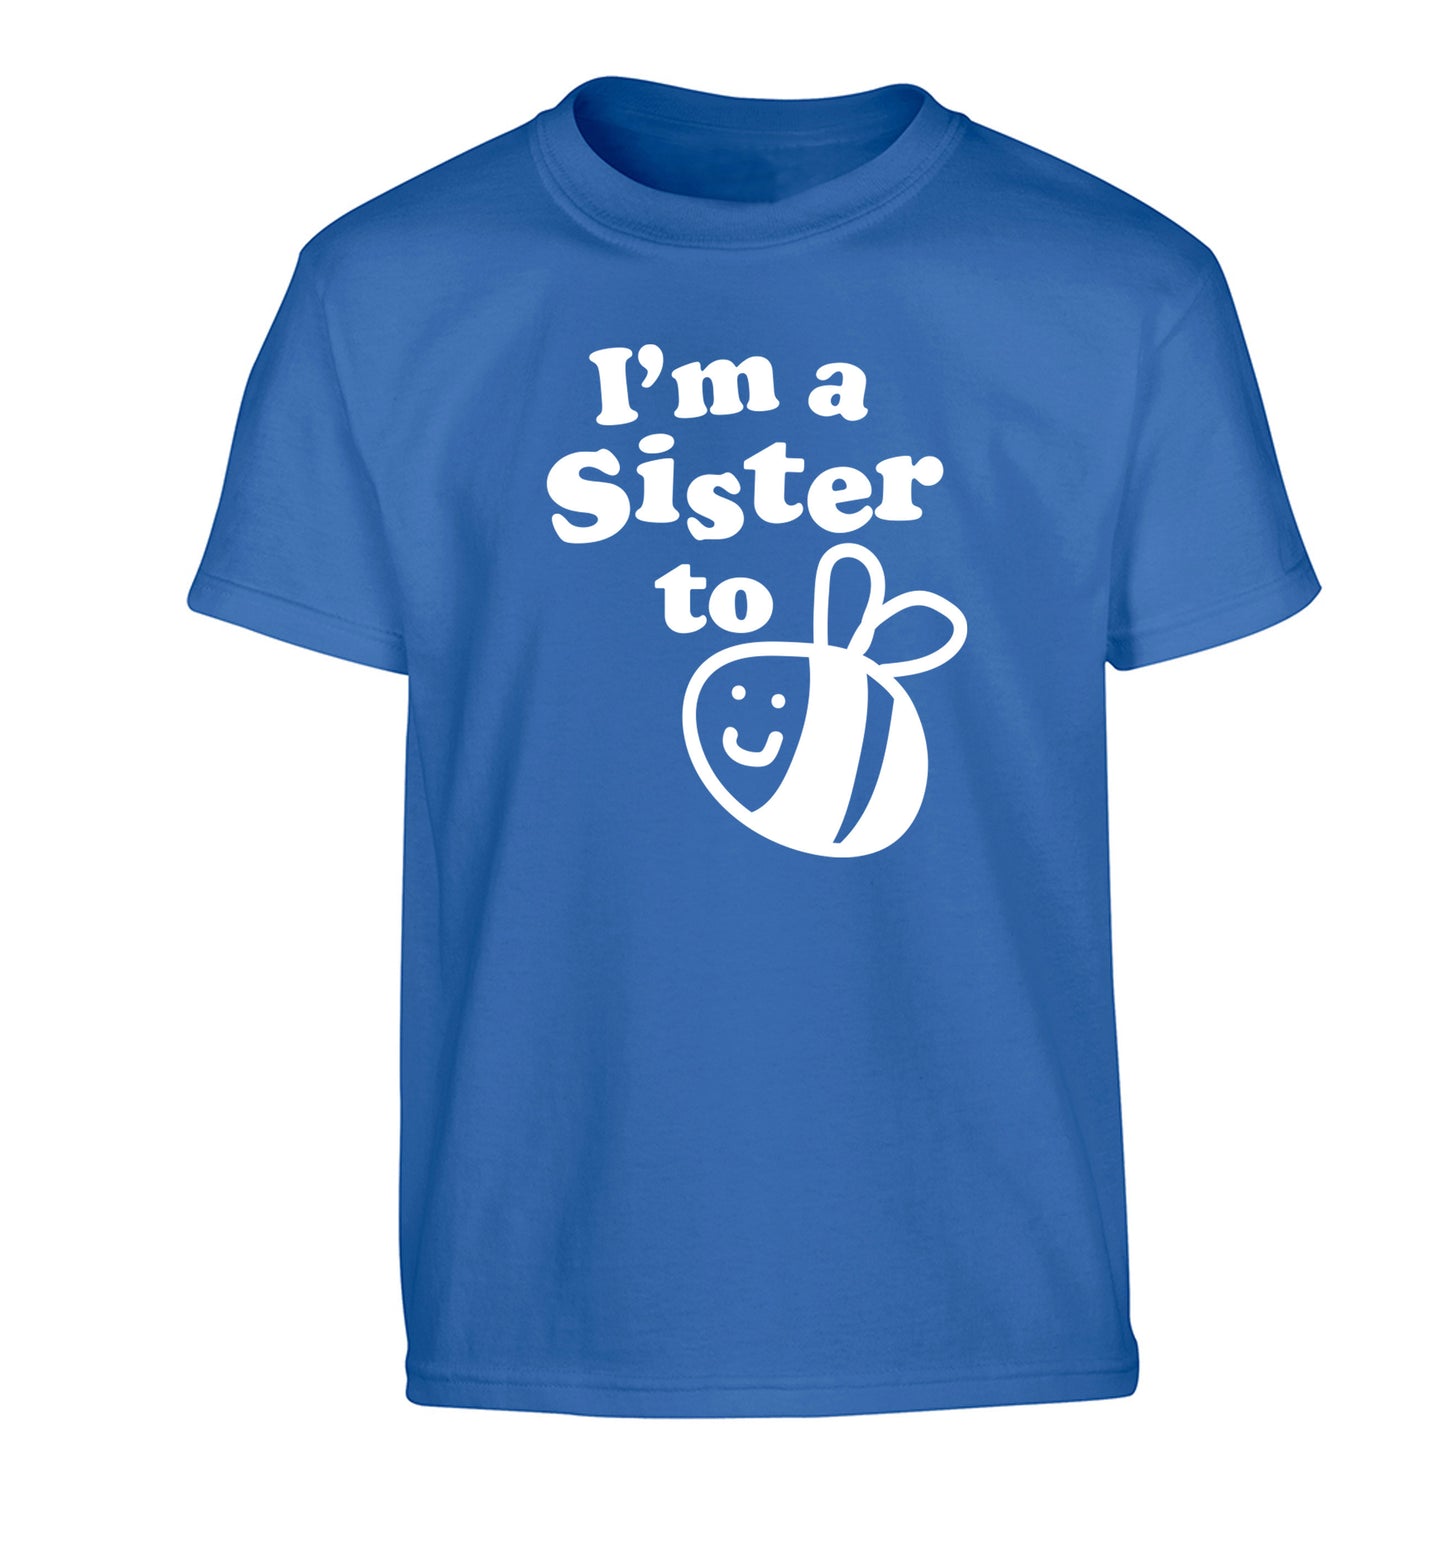 I'm a sister to be Children's blue Tshirt 12-14 Years